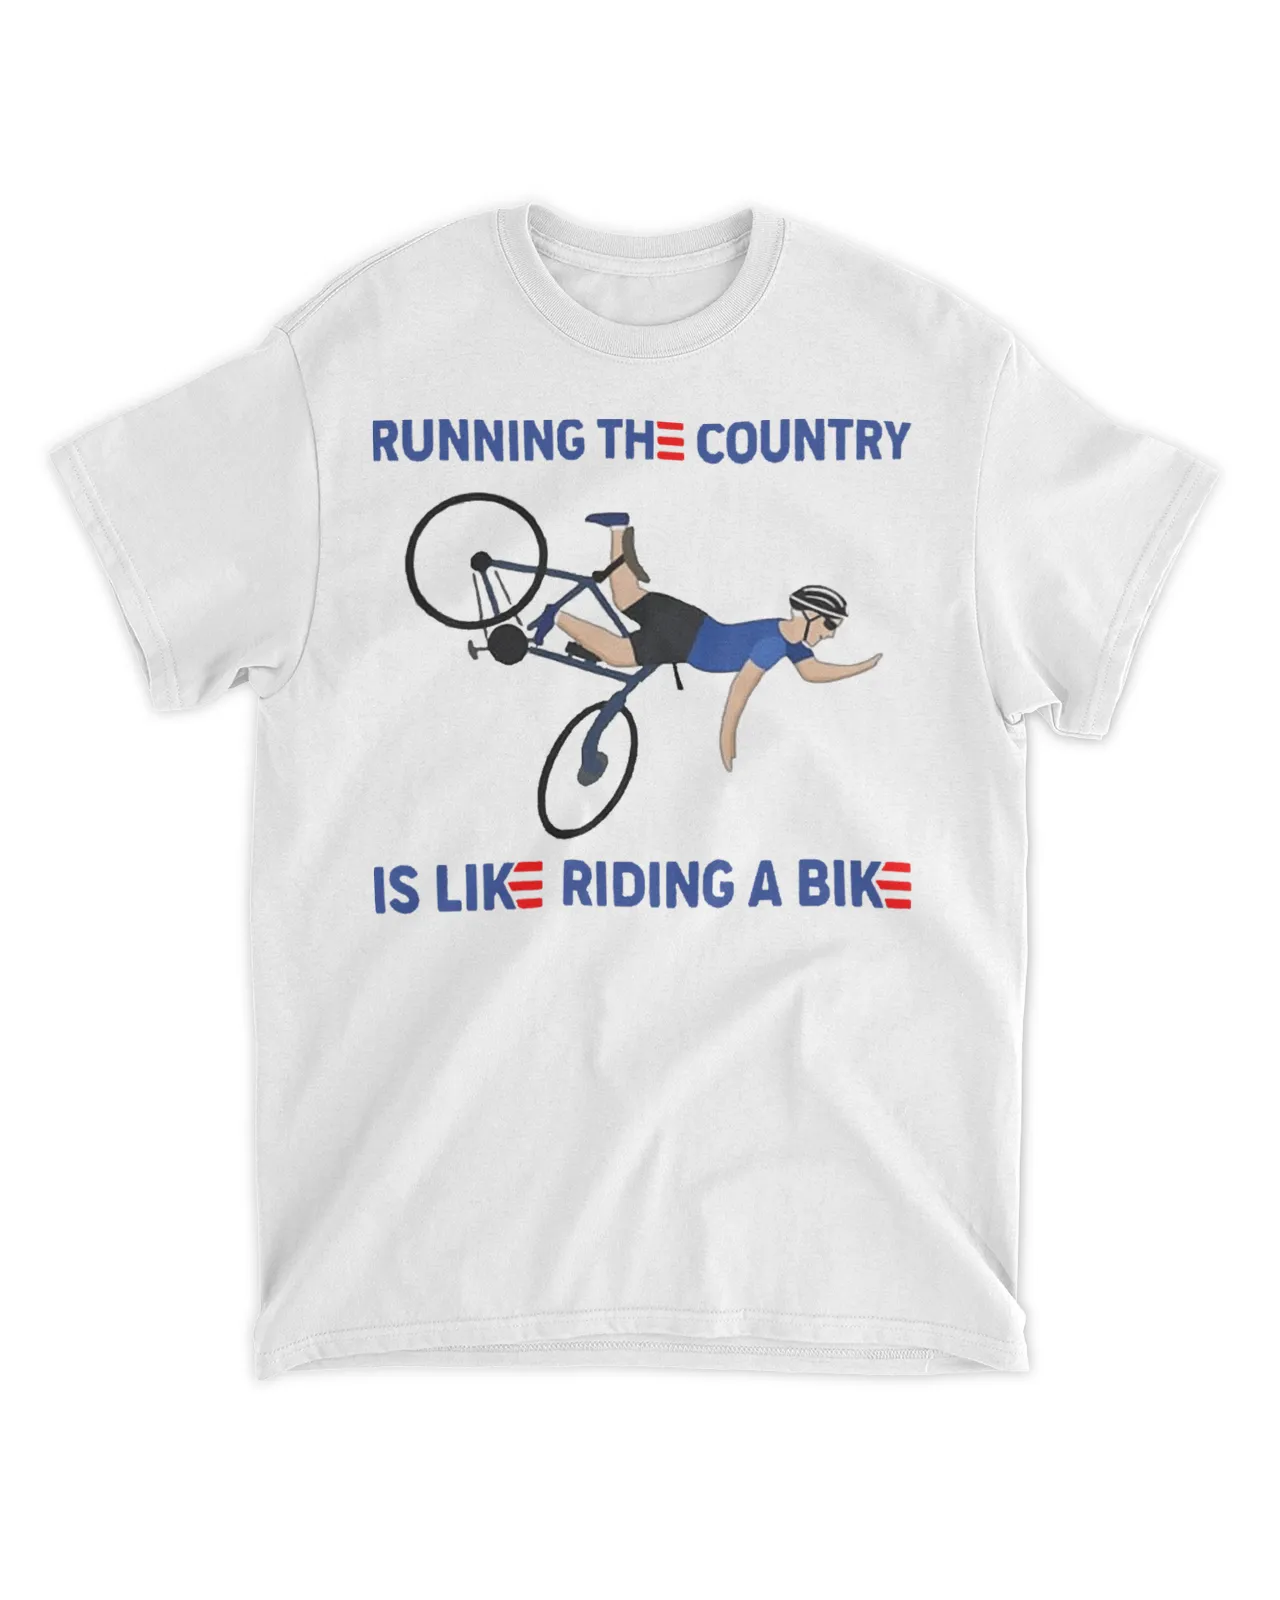  Running the country is like riding a bike shirt